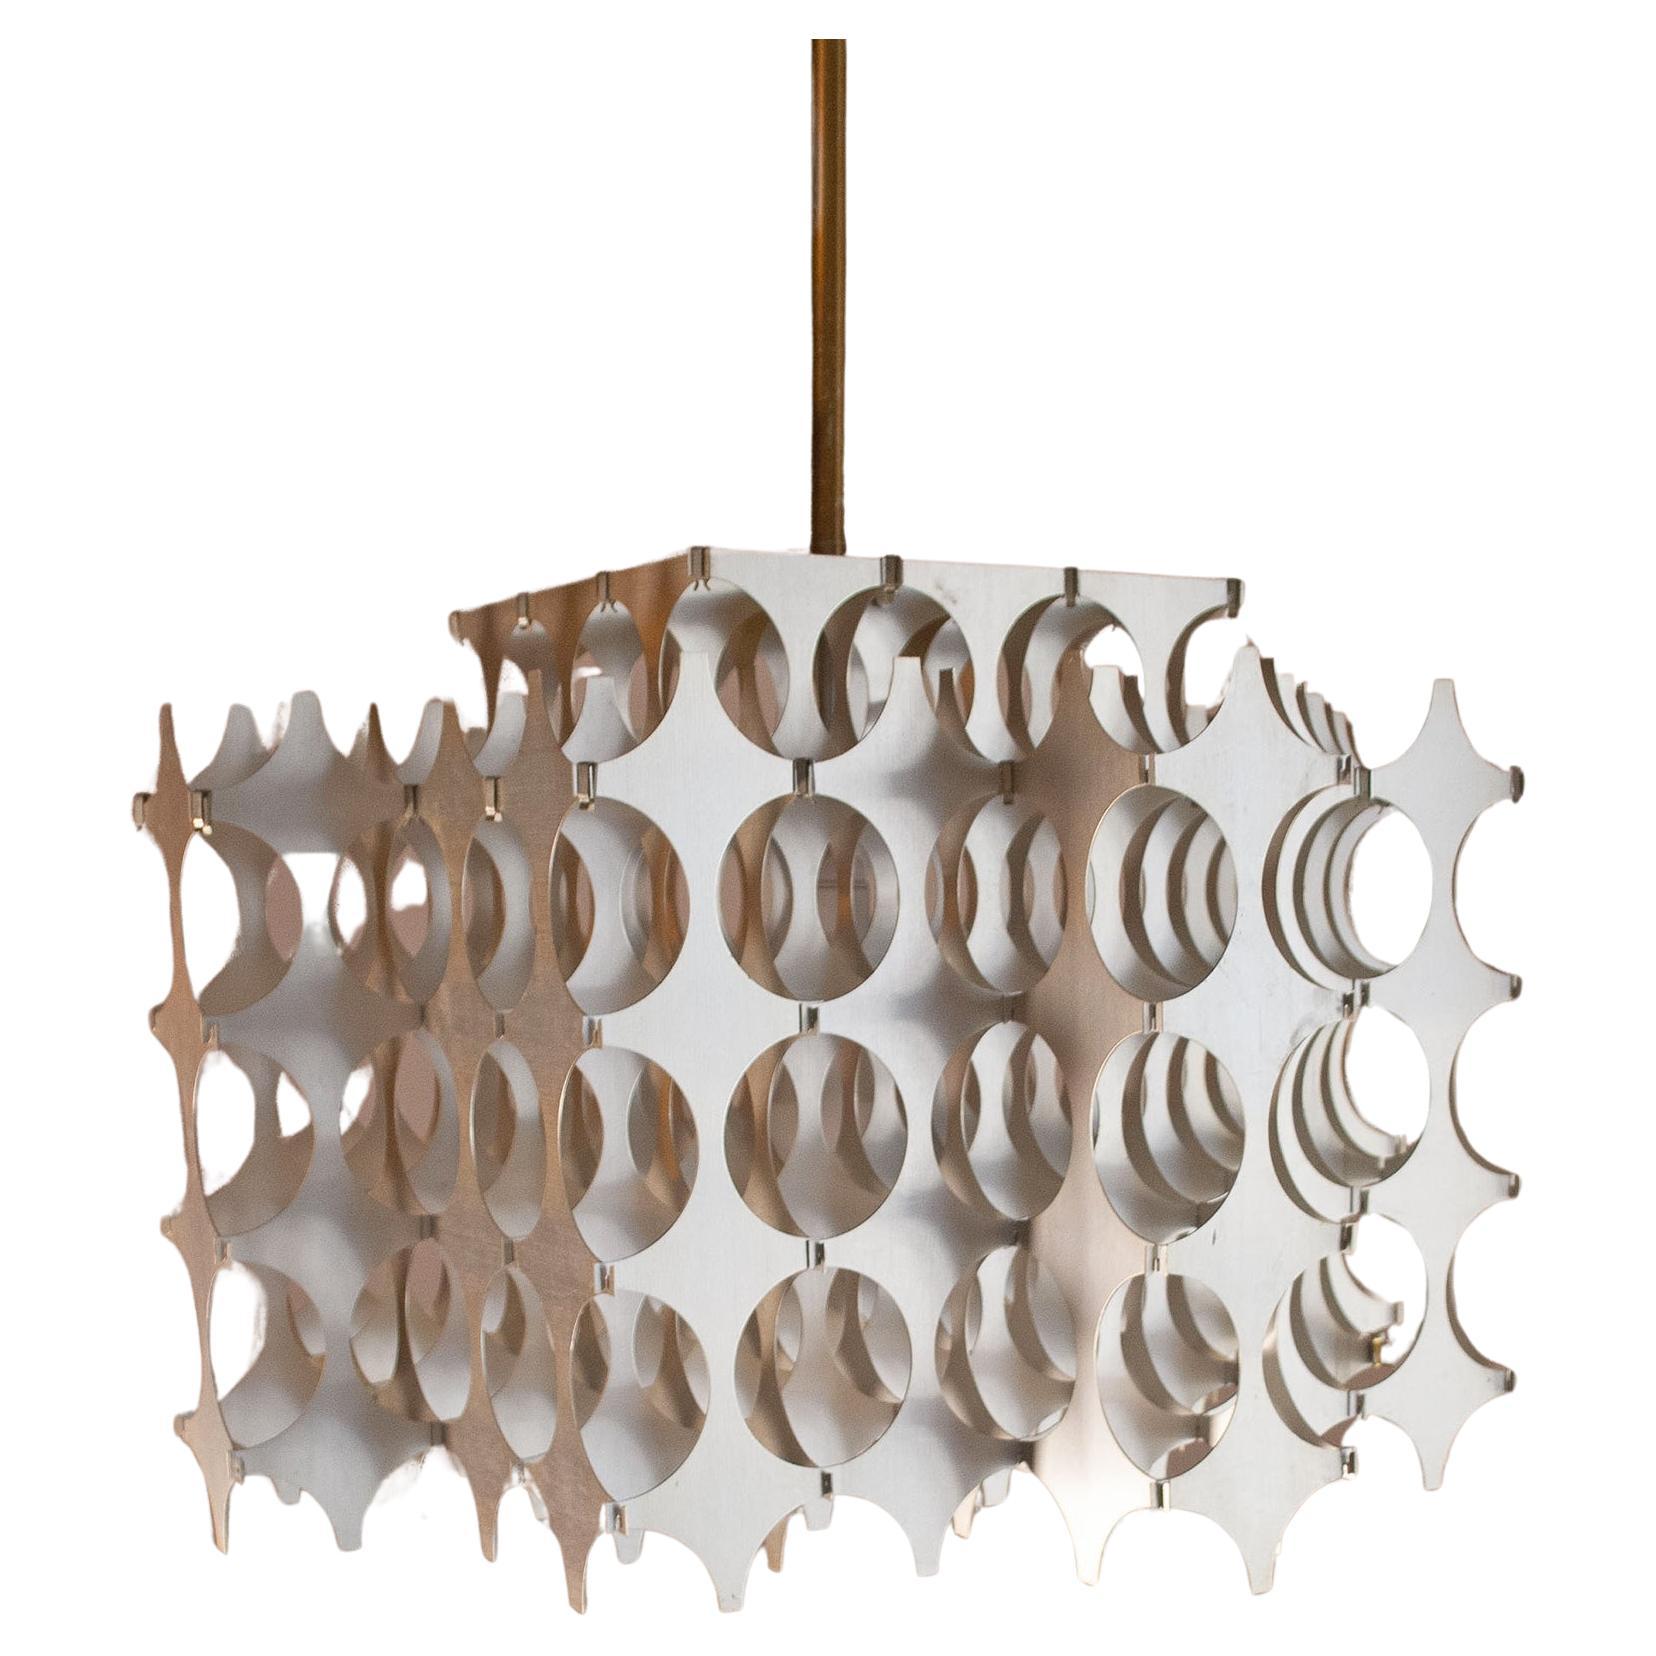 Mario Marenco chandelier Chyntia 1970s For Sale